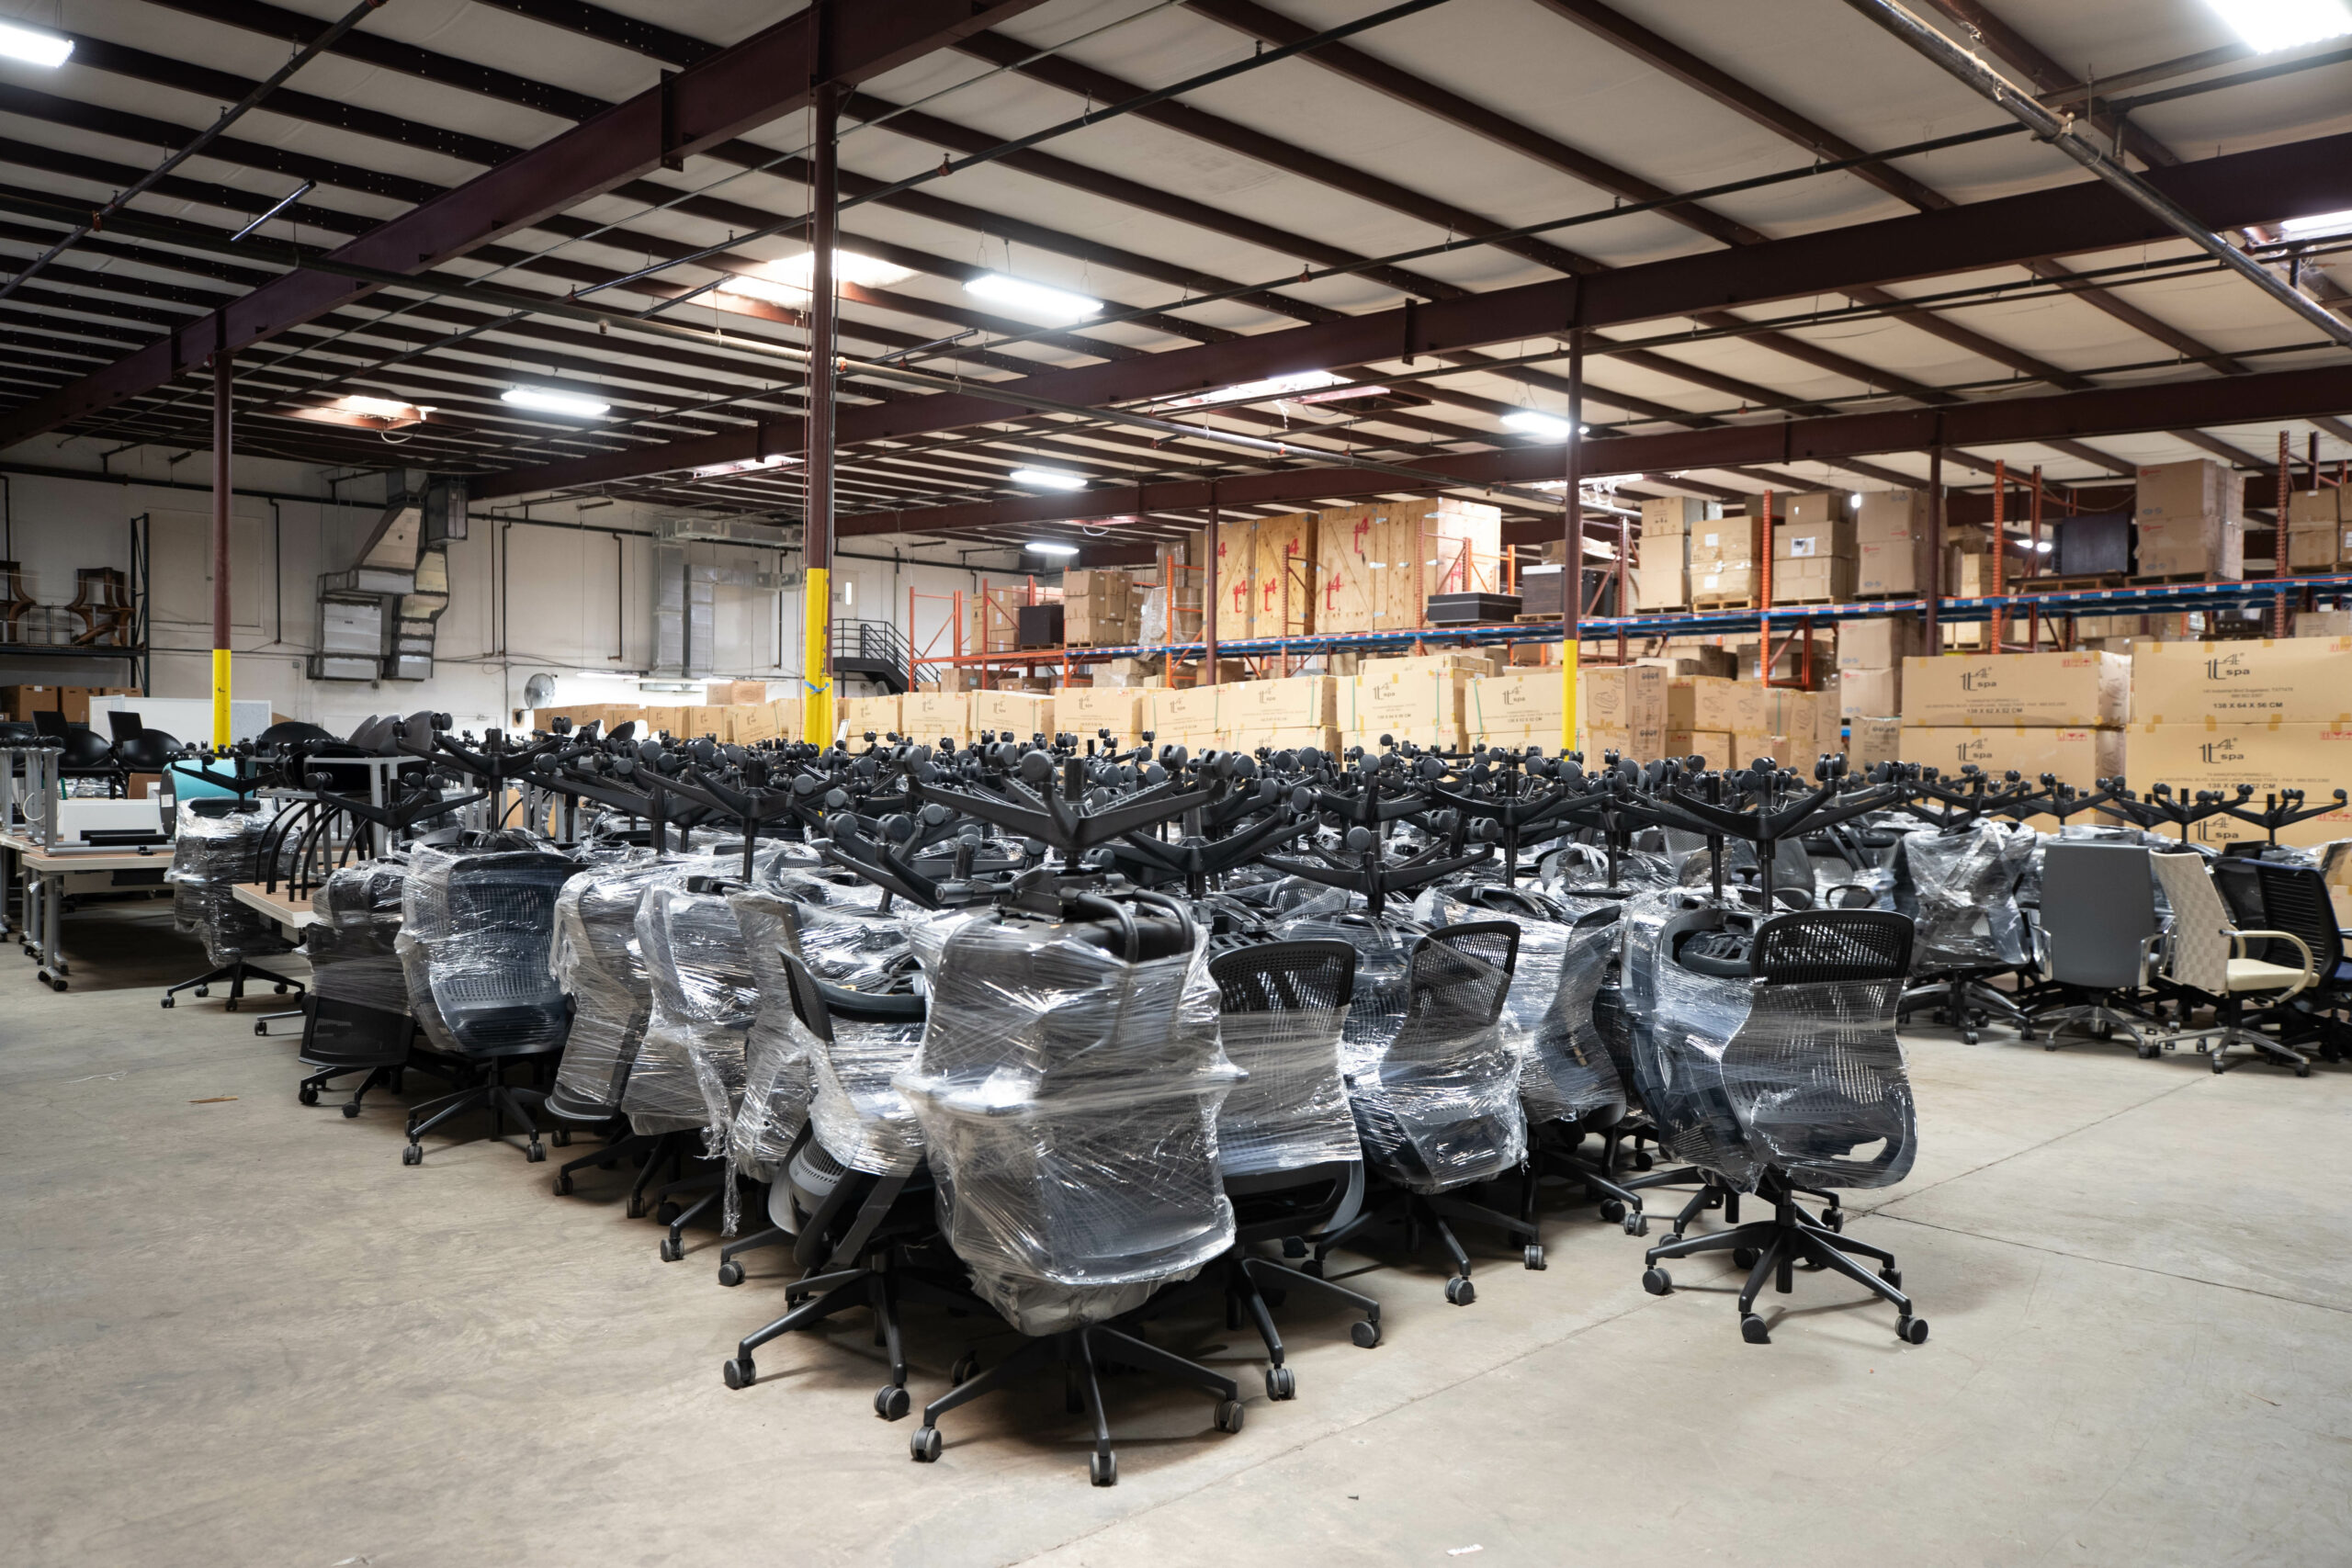 Seeking A Signature Furniture Warehouse In Sugar Land, Texas? Any Suggestions?